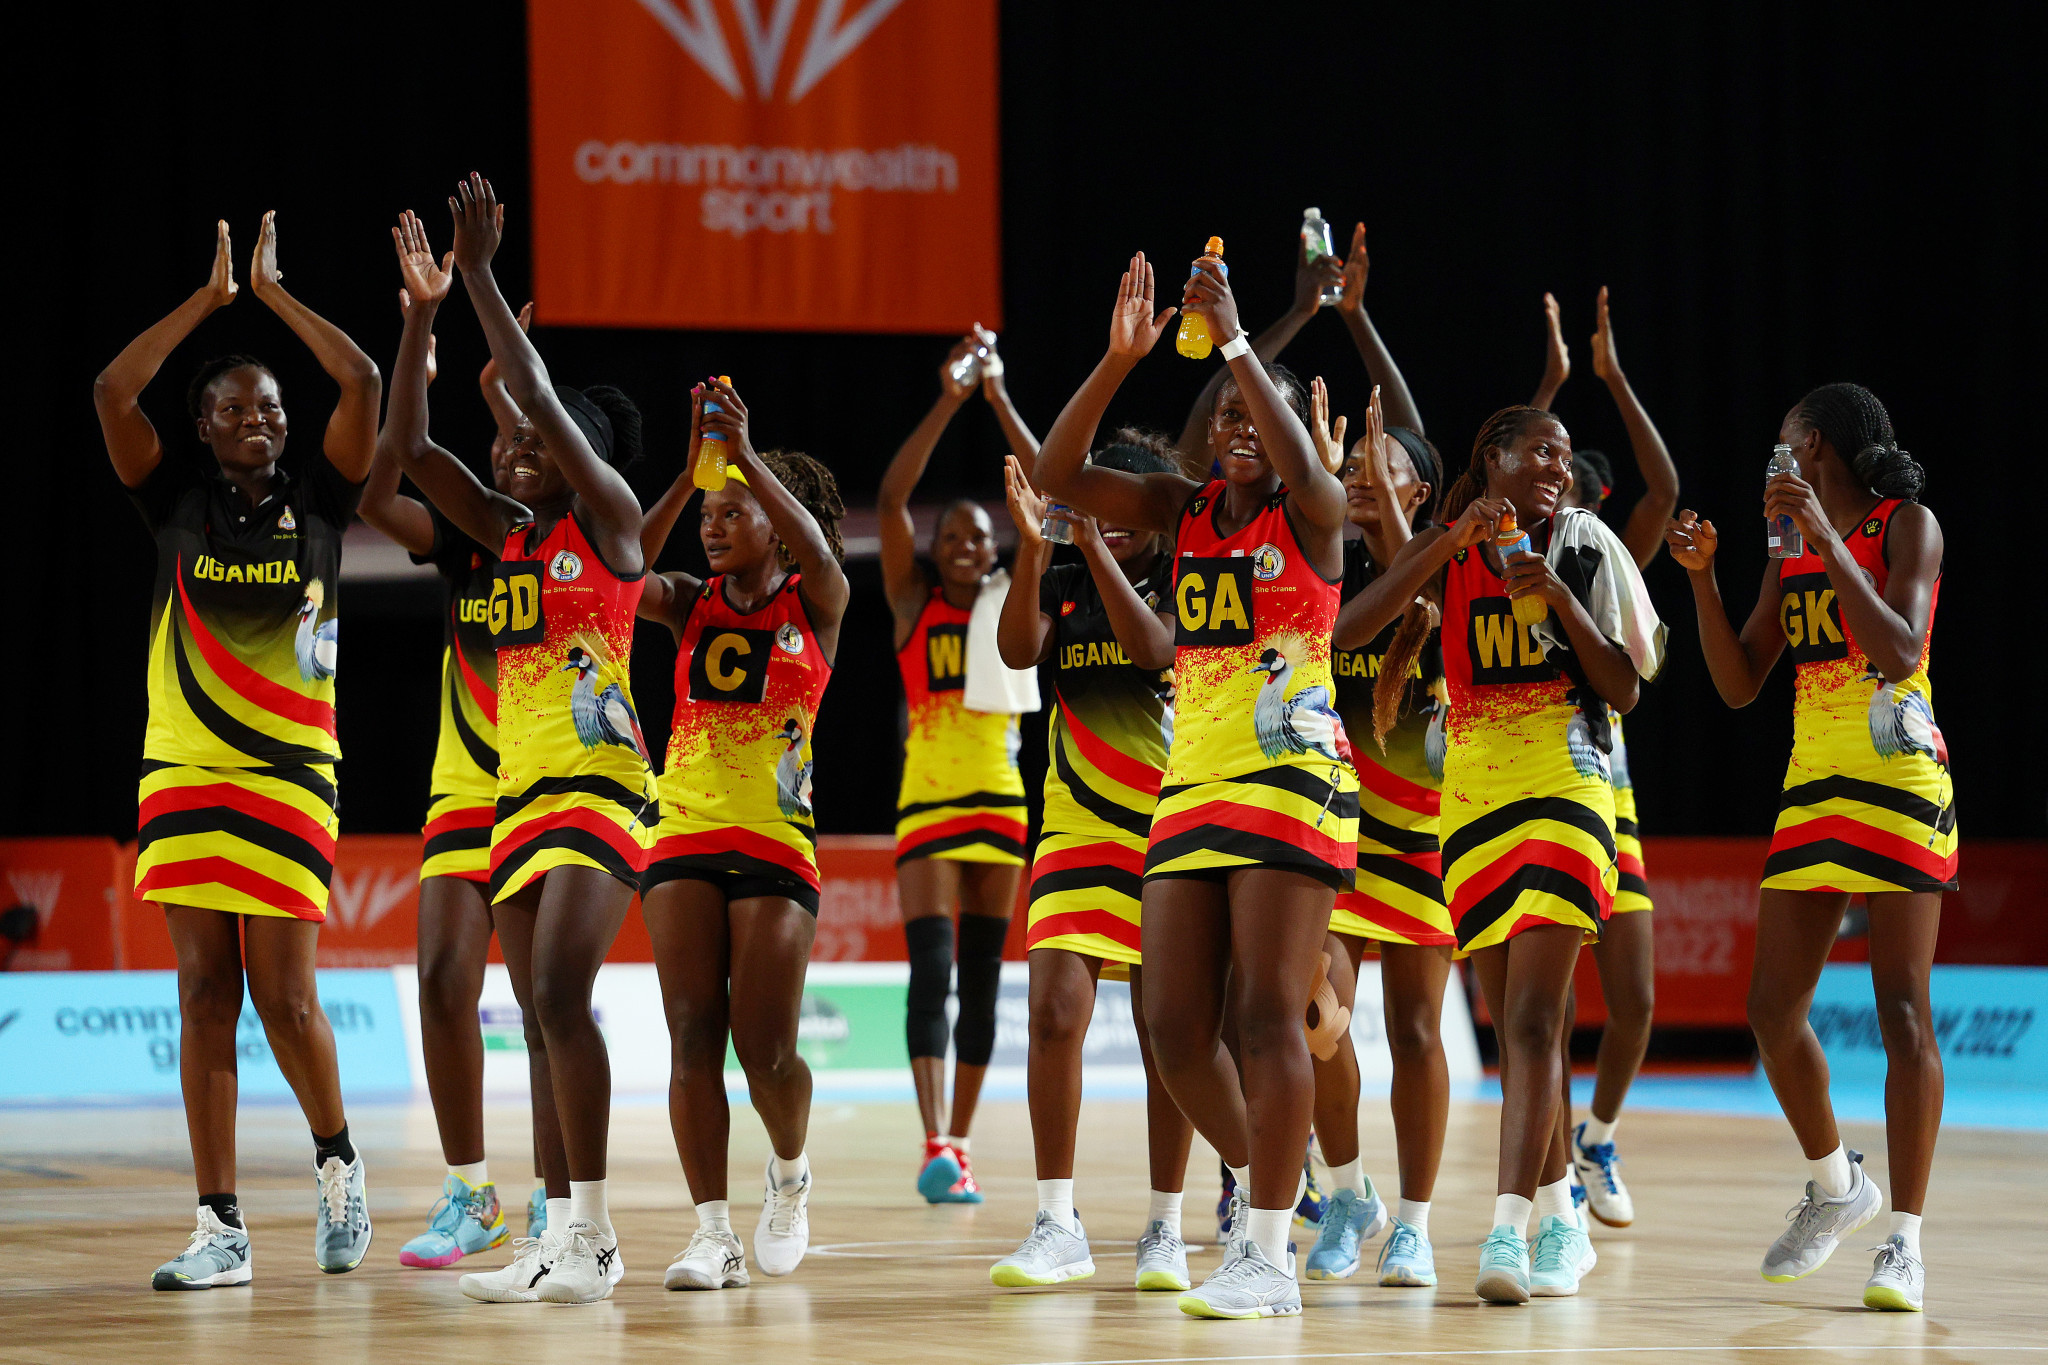 Uganda's netball players are demanding payment after competing at Birmingham 2022 ©Getty Images